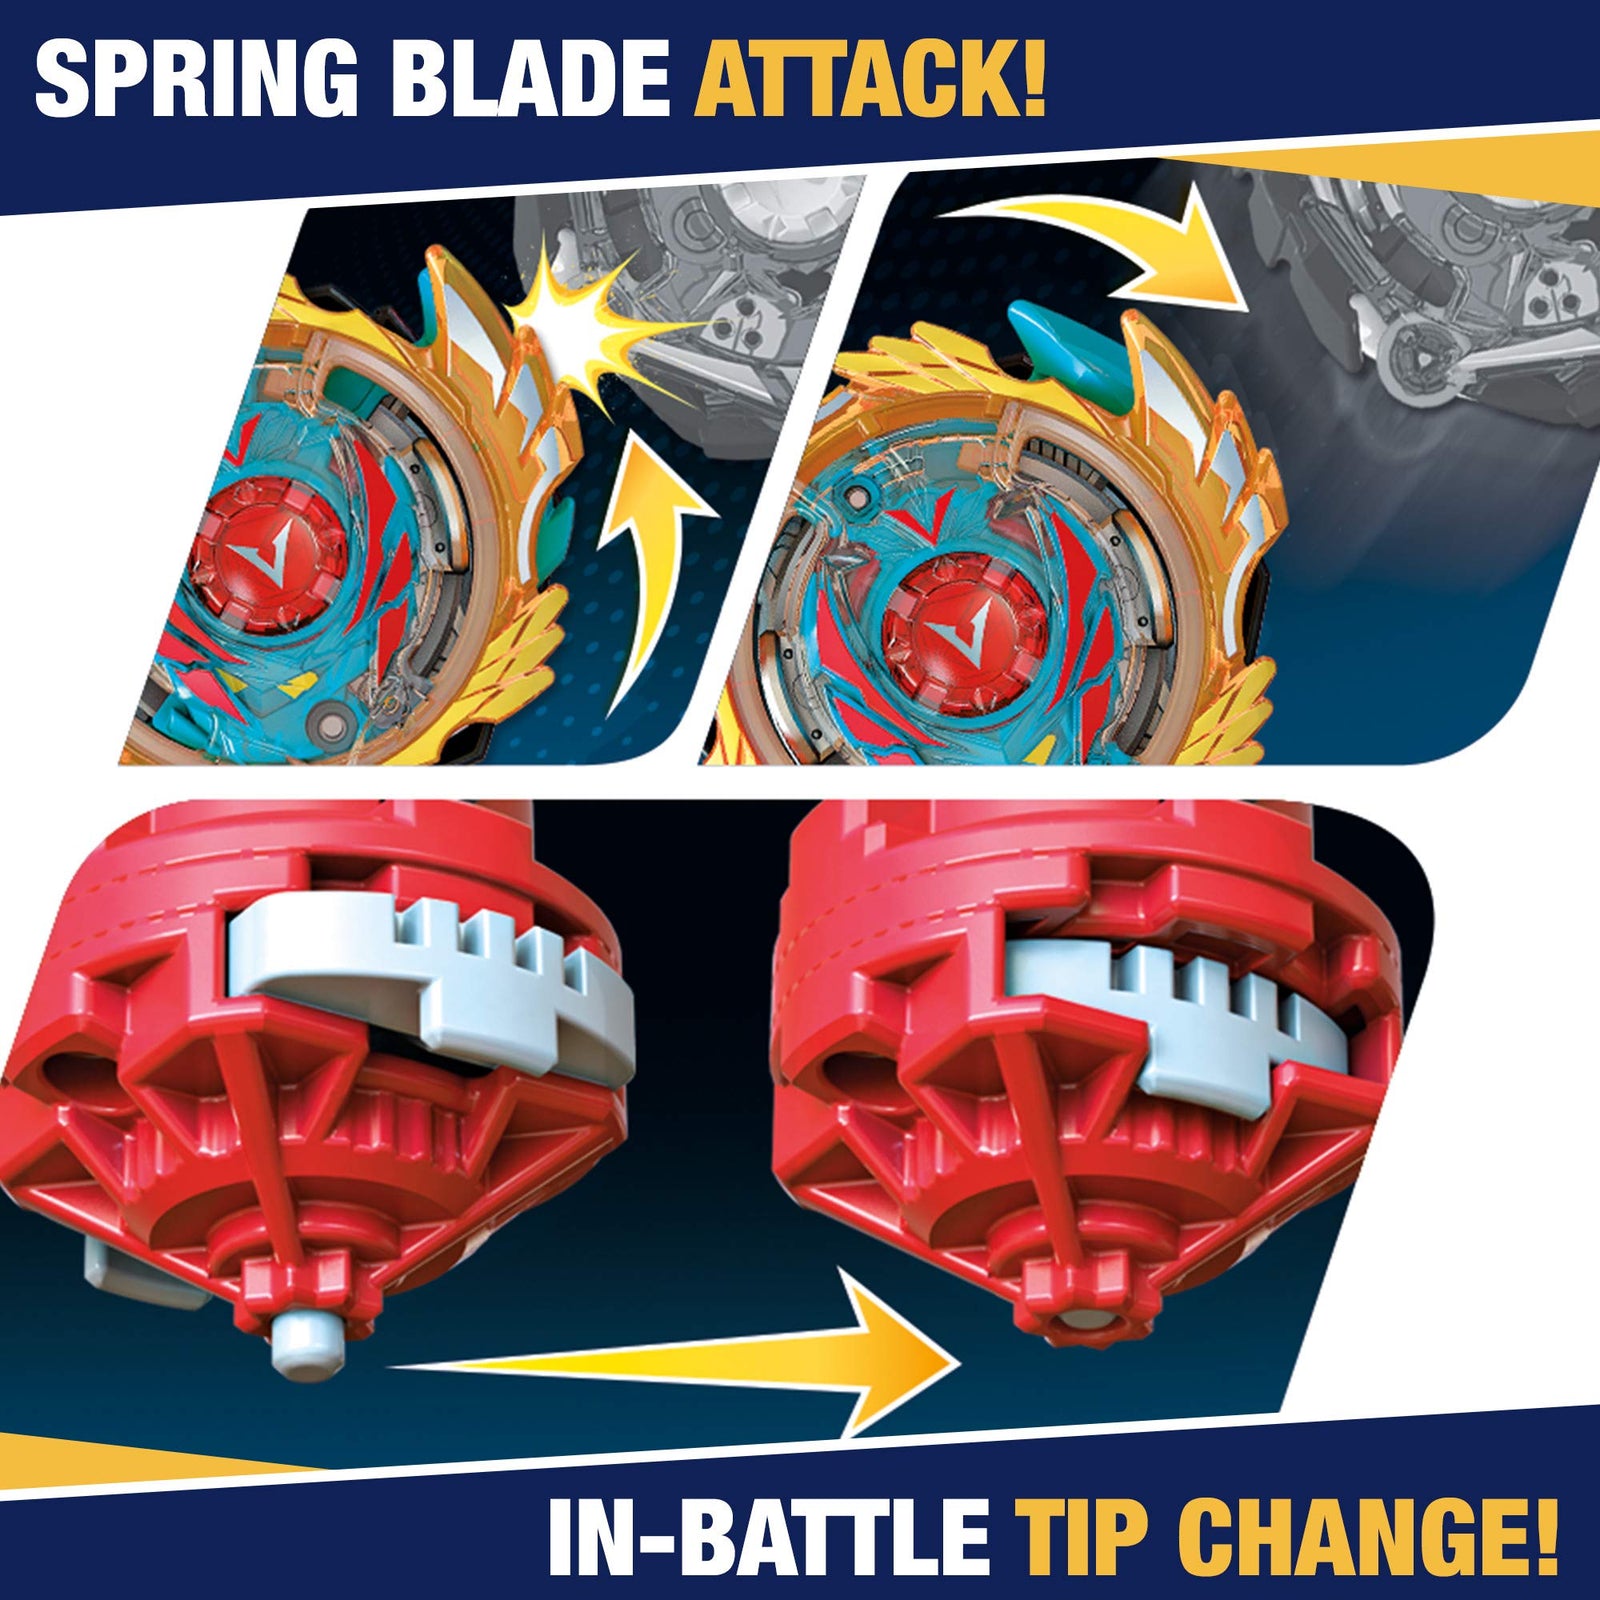 Beyblade Burst Evolution Elite Warrior 4-Pack - 4 Iconic Right-Spin Battling Tops, Game ((Amazon Exclusive)